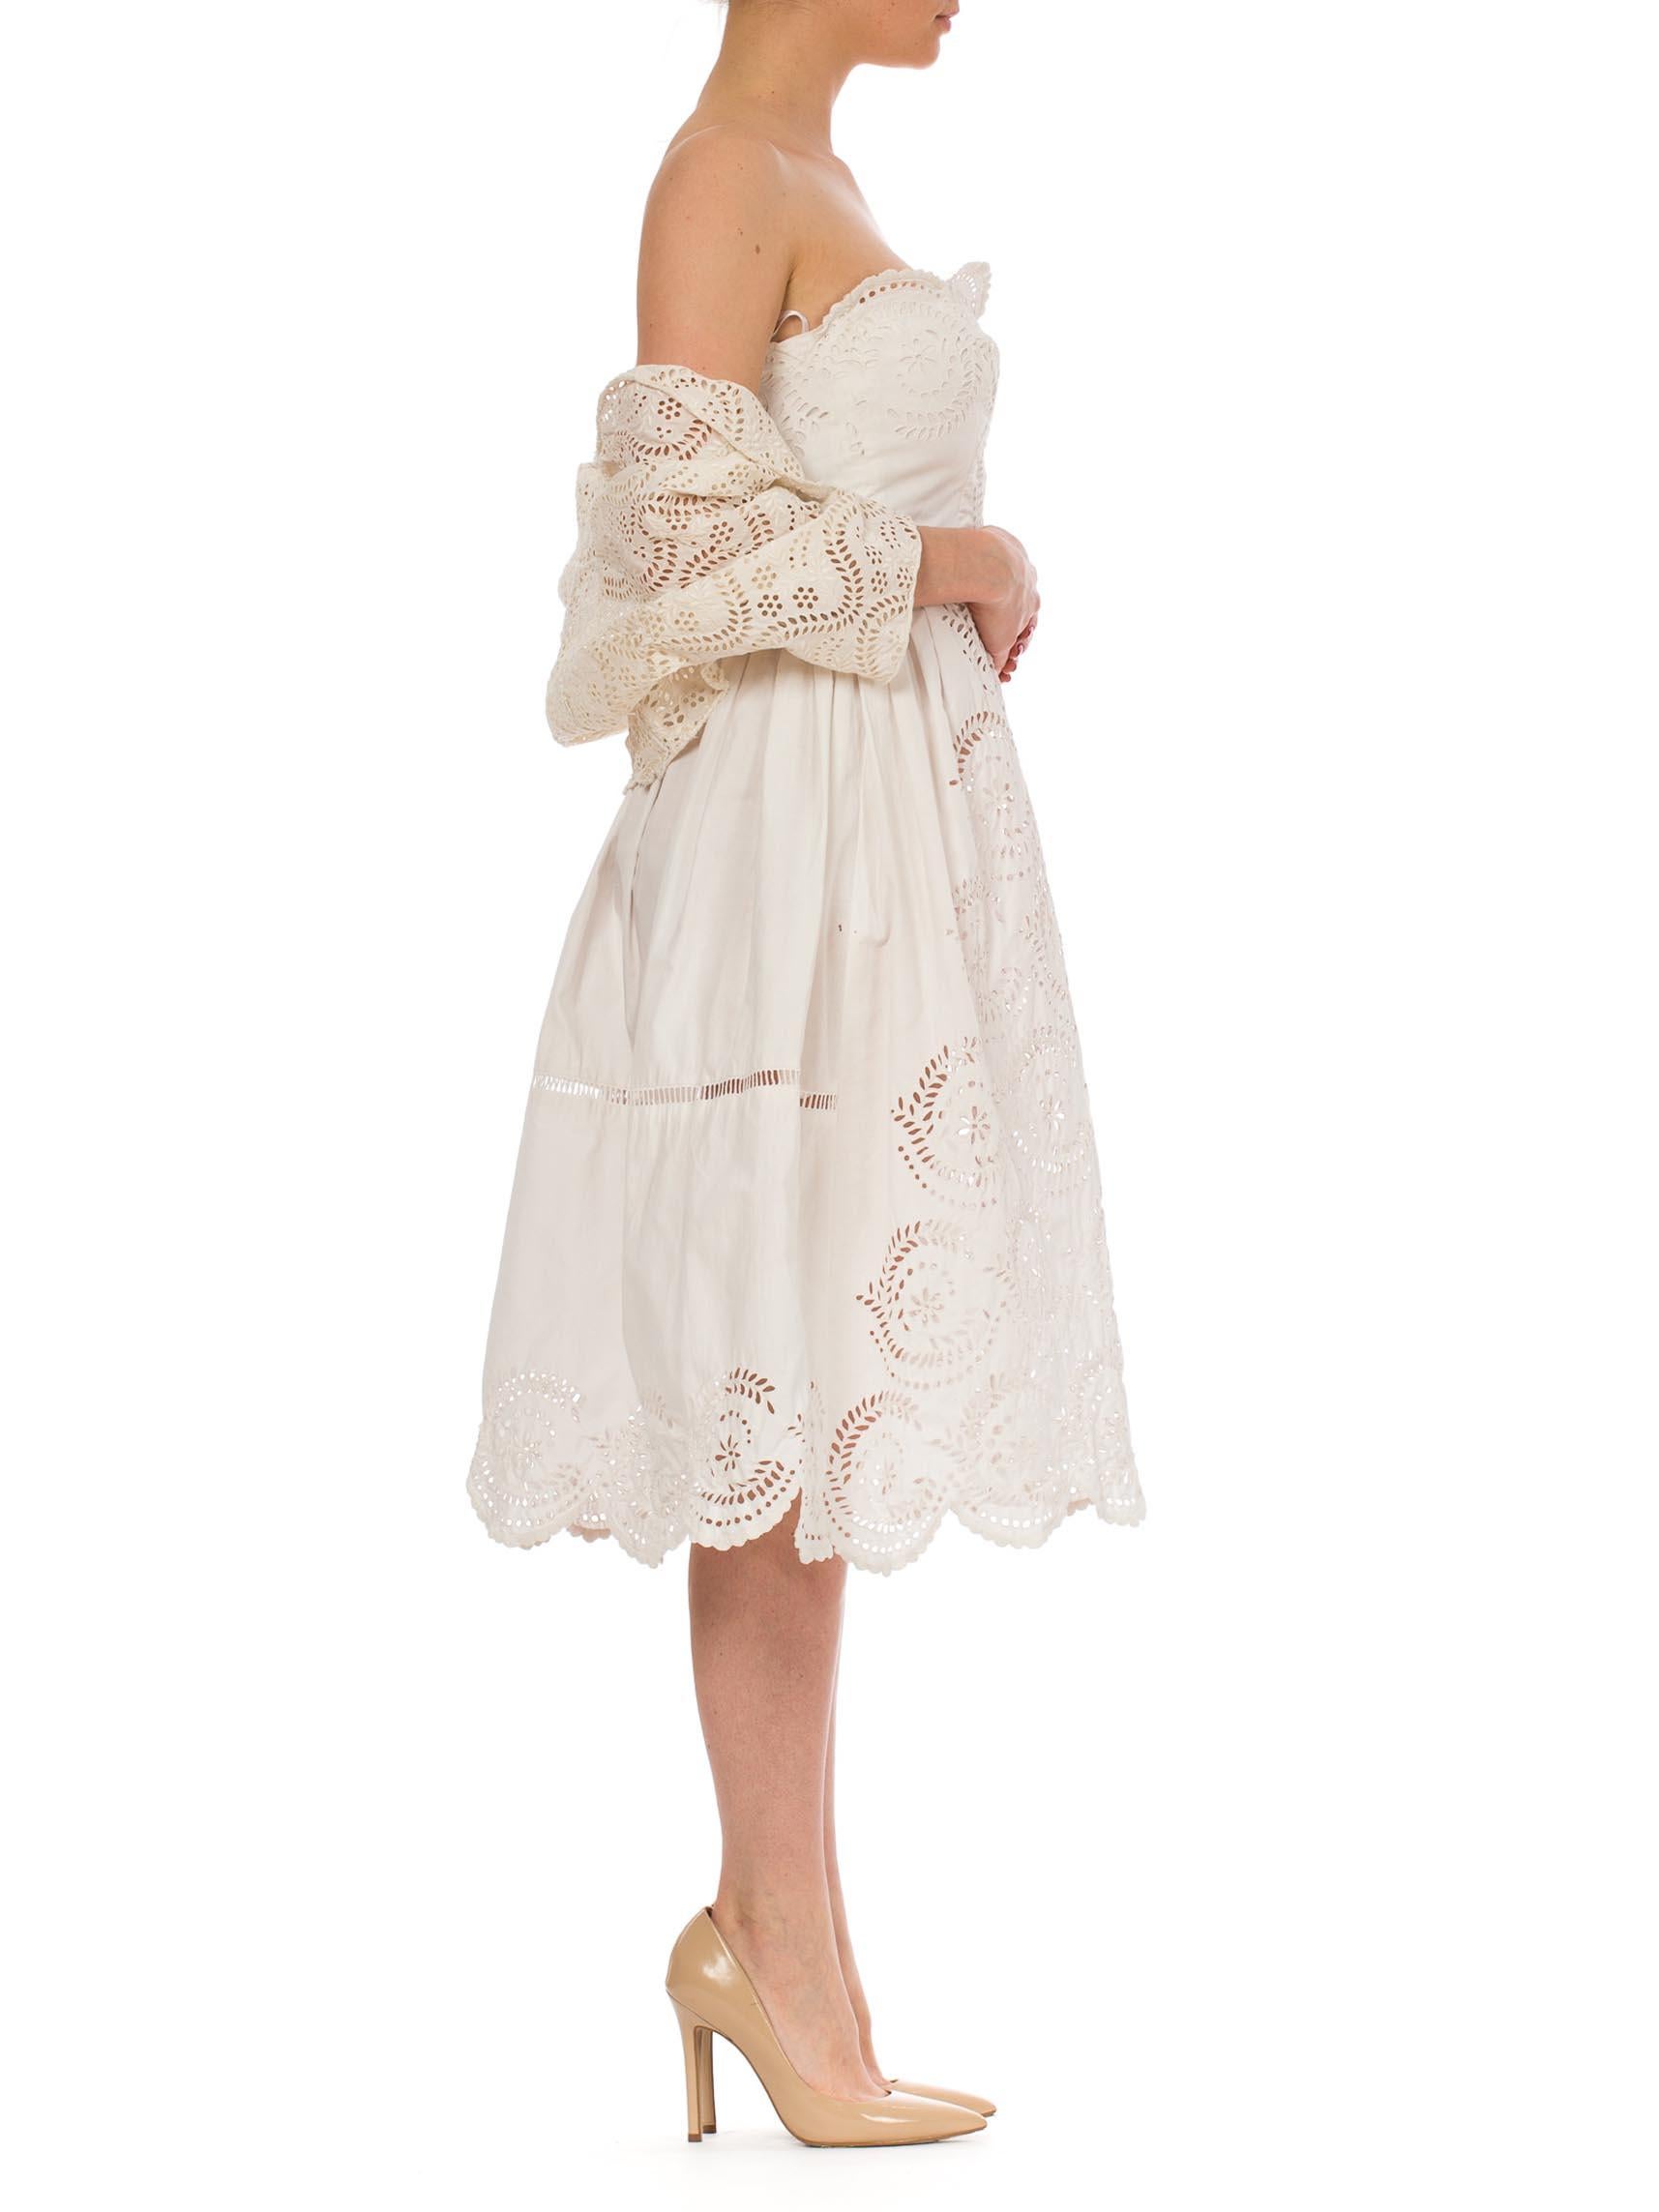 Women's 1950S Off White Strapless Dress Made From Victorian Hand Embroidered Cotton Eye For Sale